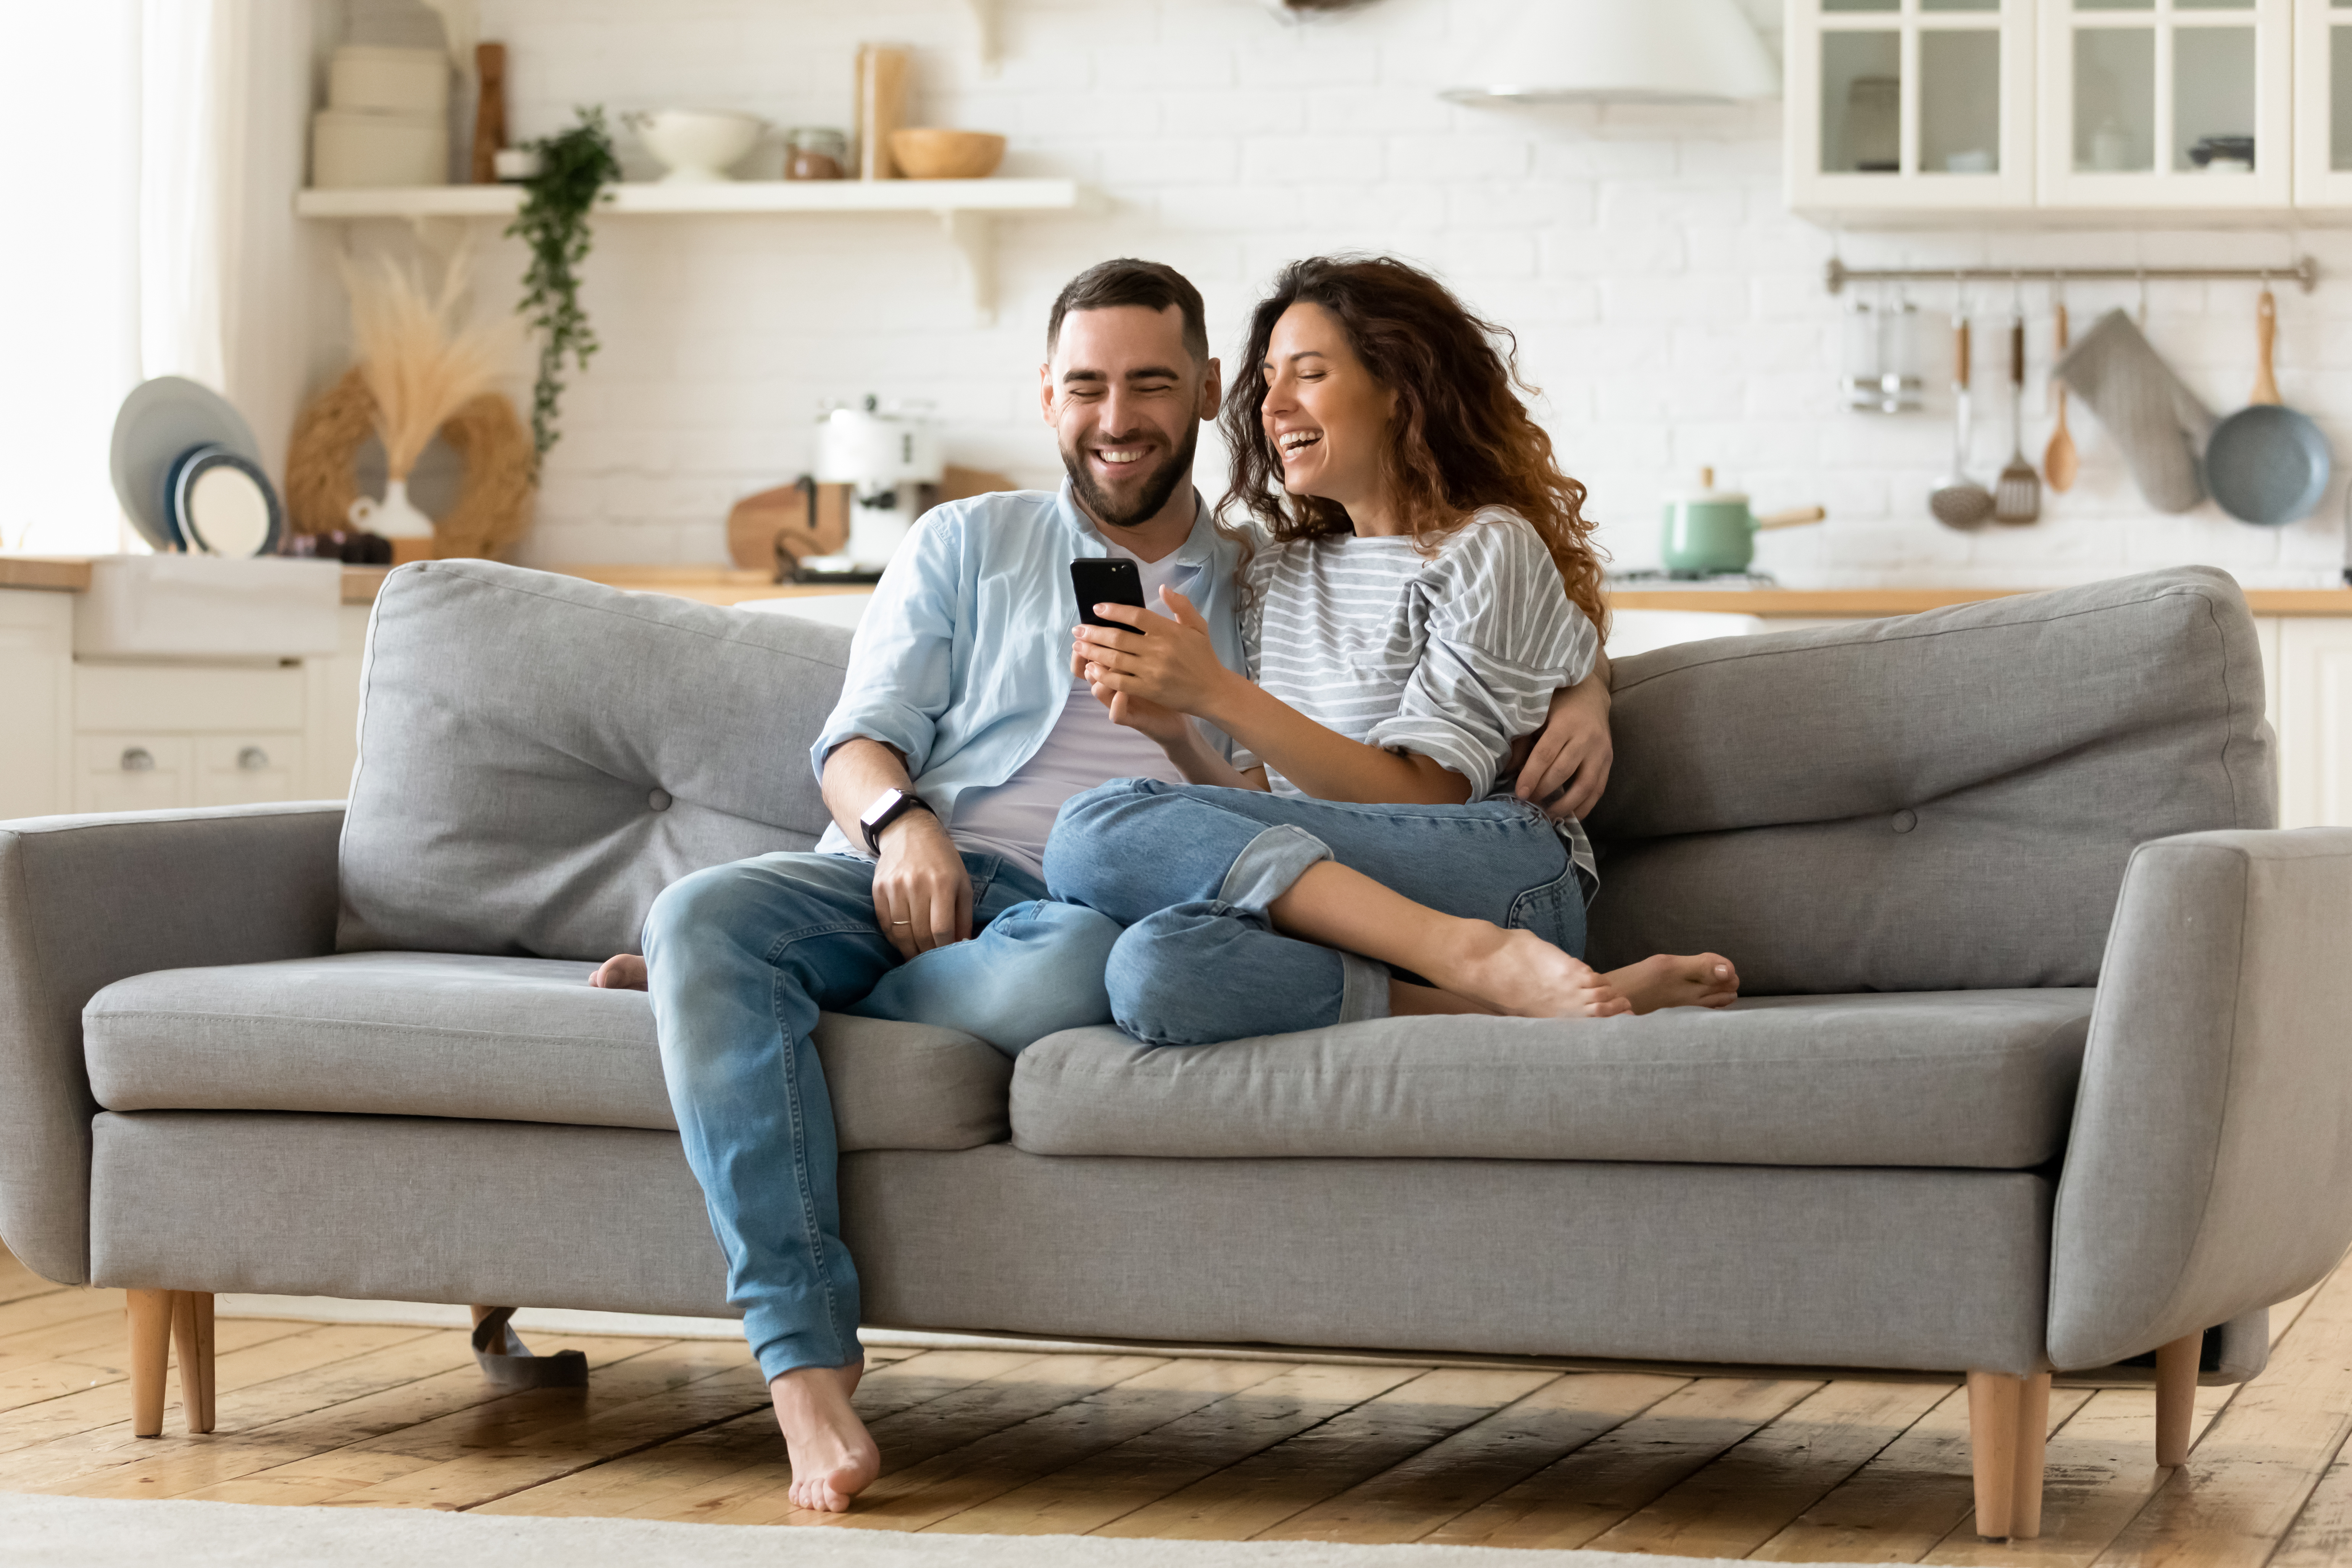 Happy young woman and man hugging, using smartphone together, sitting on cozy couch at home, smiling overjoyed wife and husband looking at phone screen, sitting on sofa in modern living room